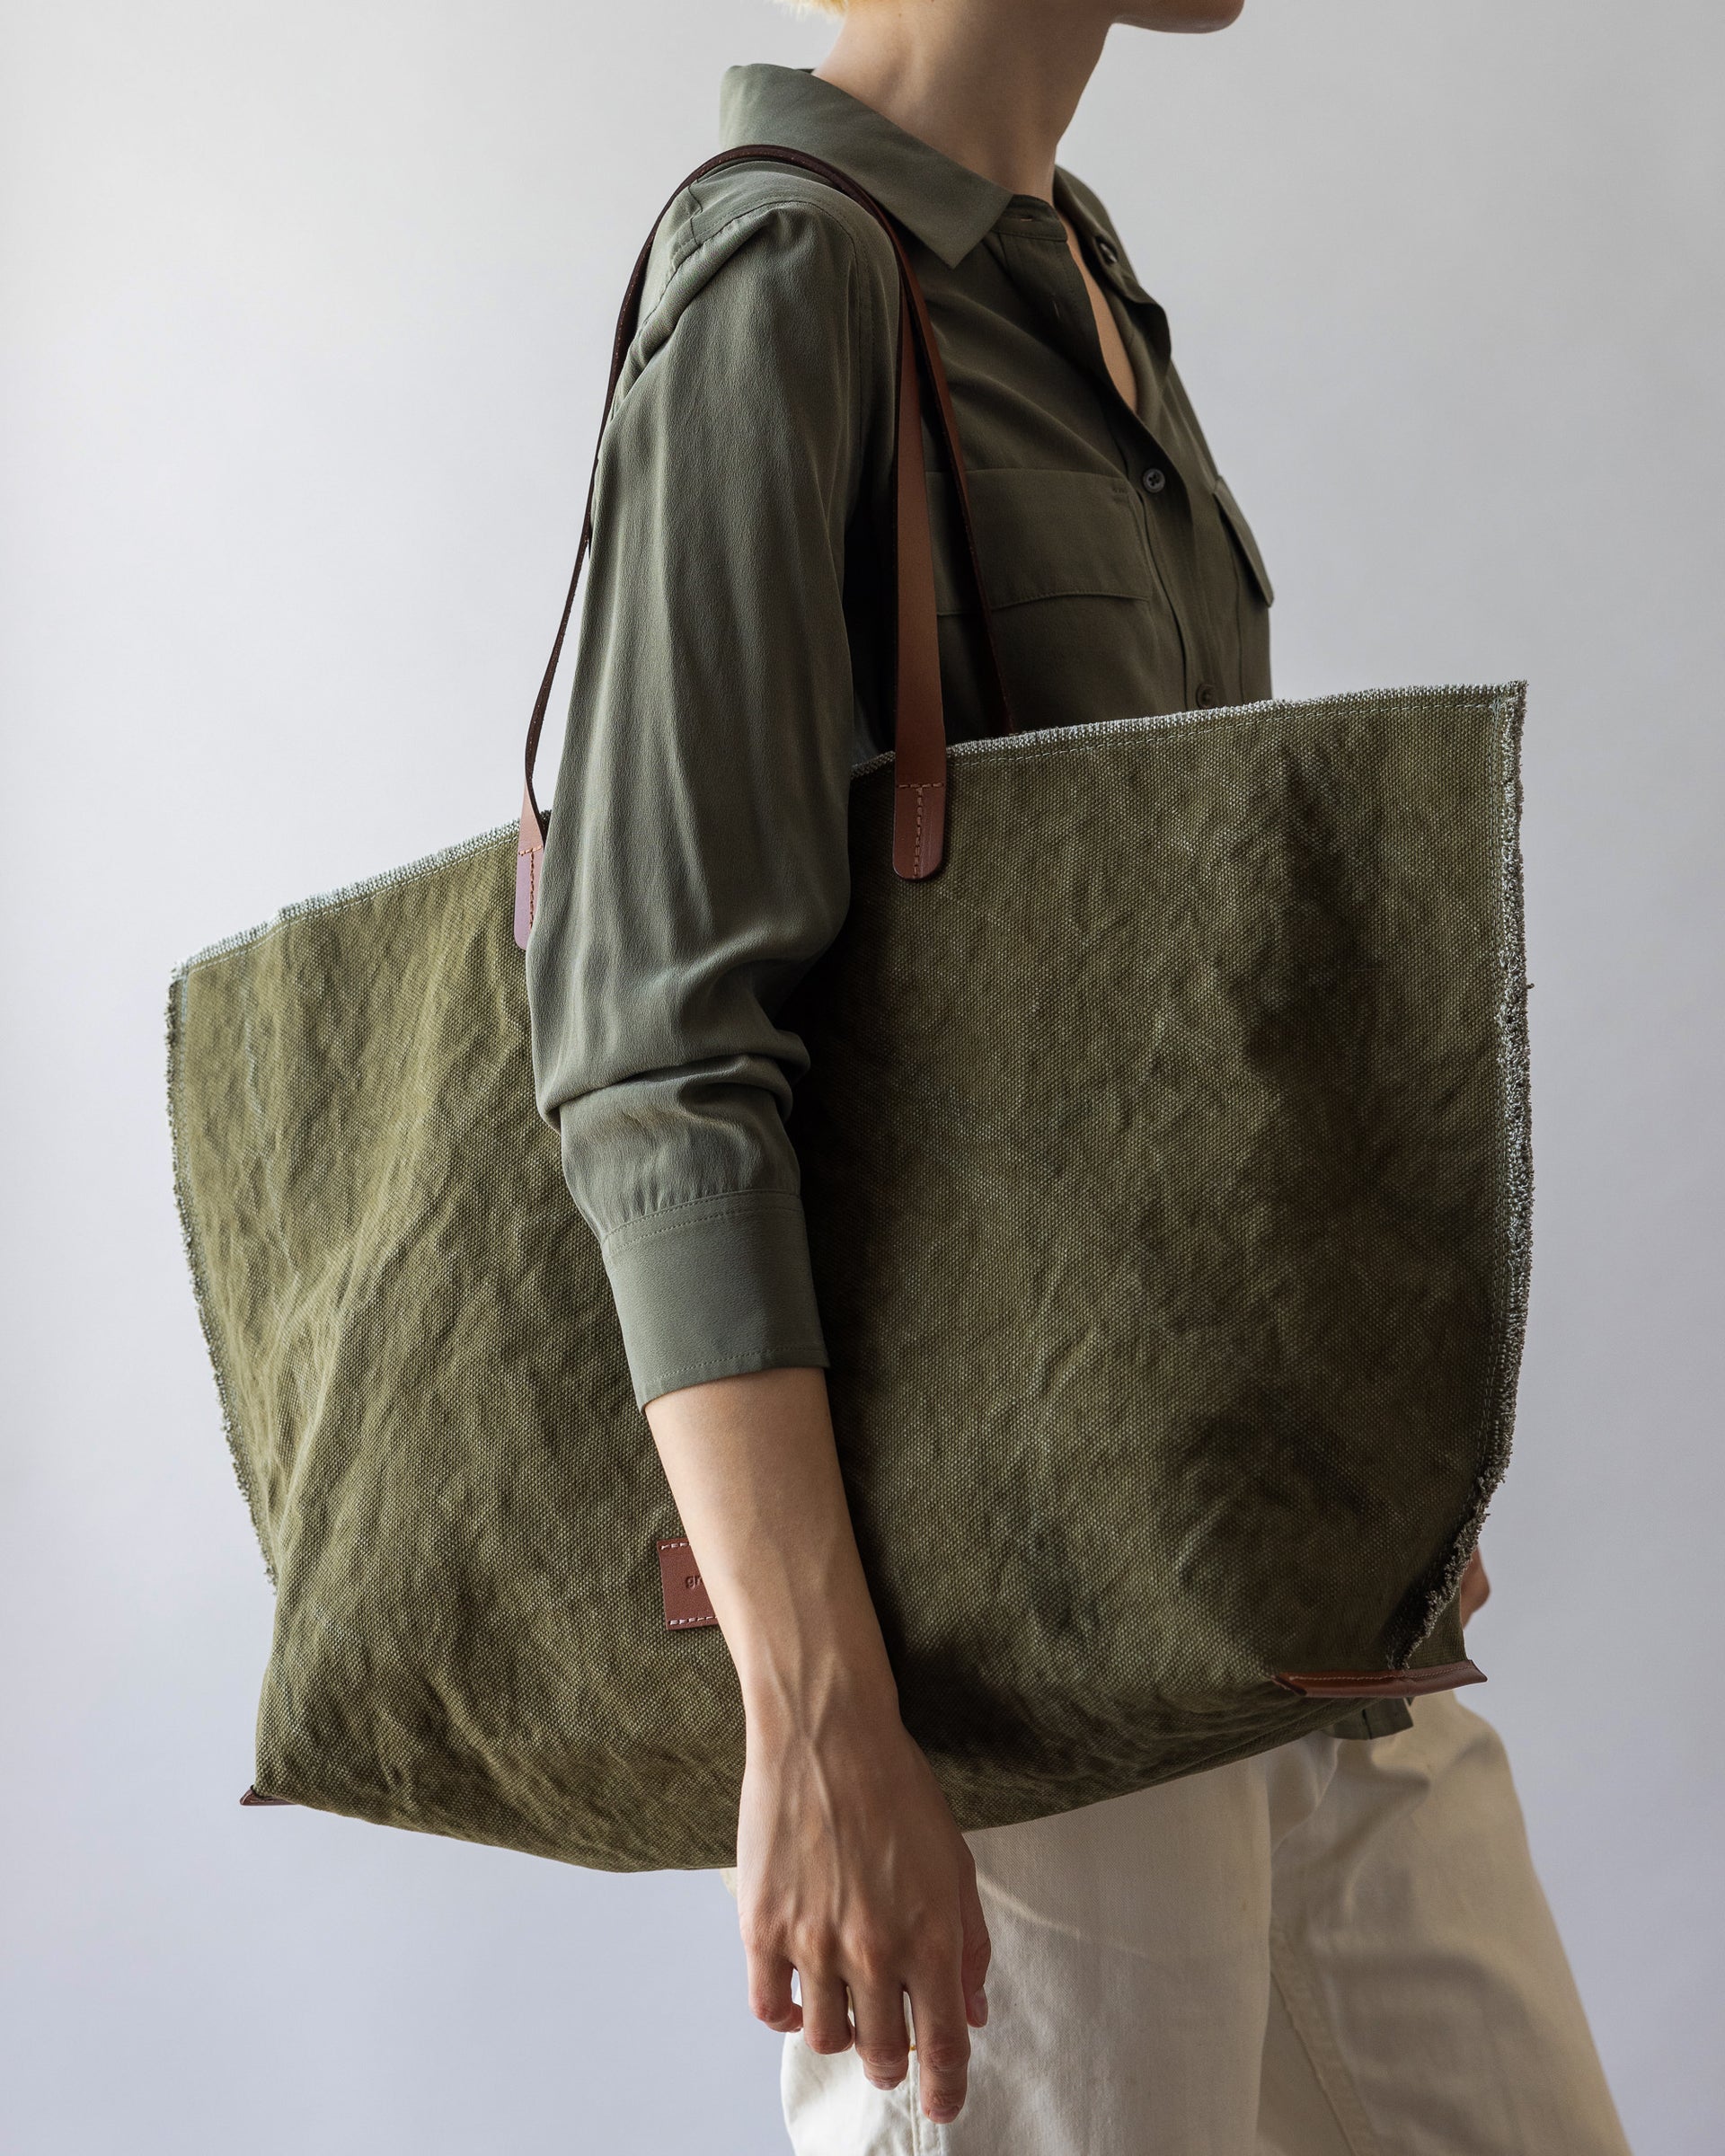 A blonde woman carrying an Olive Sienna Hana Canvas Boat Bag over her shoulder 